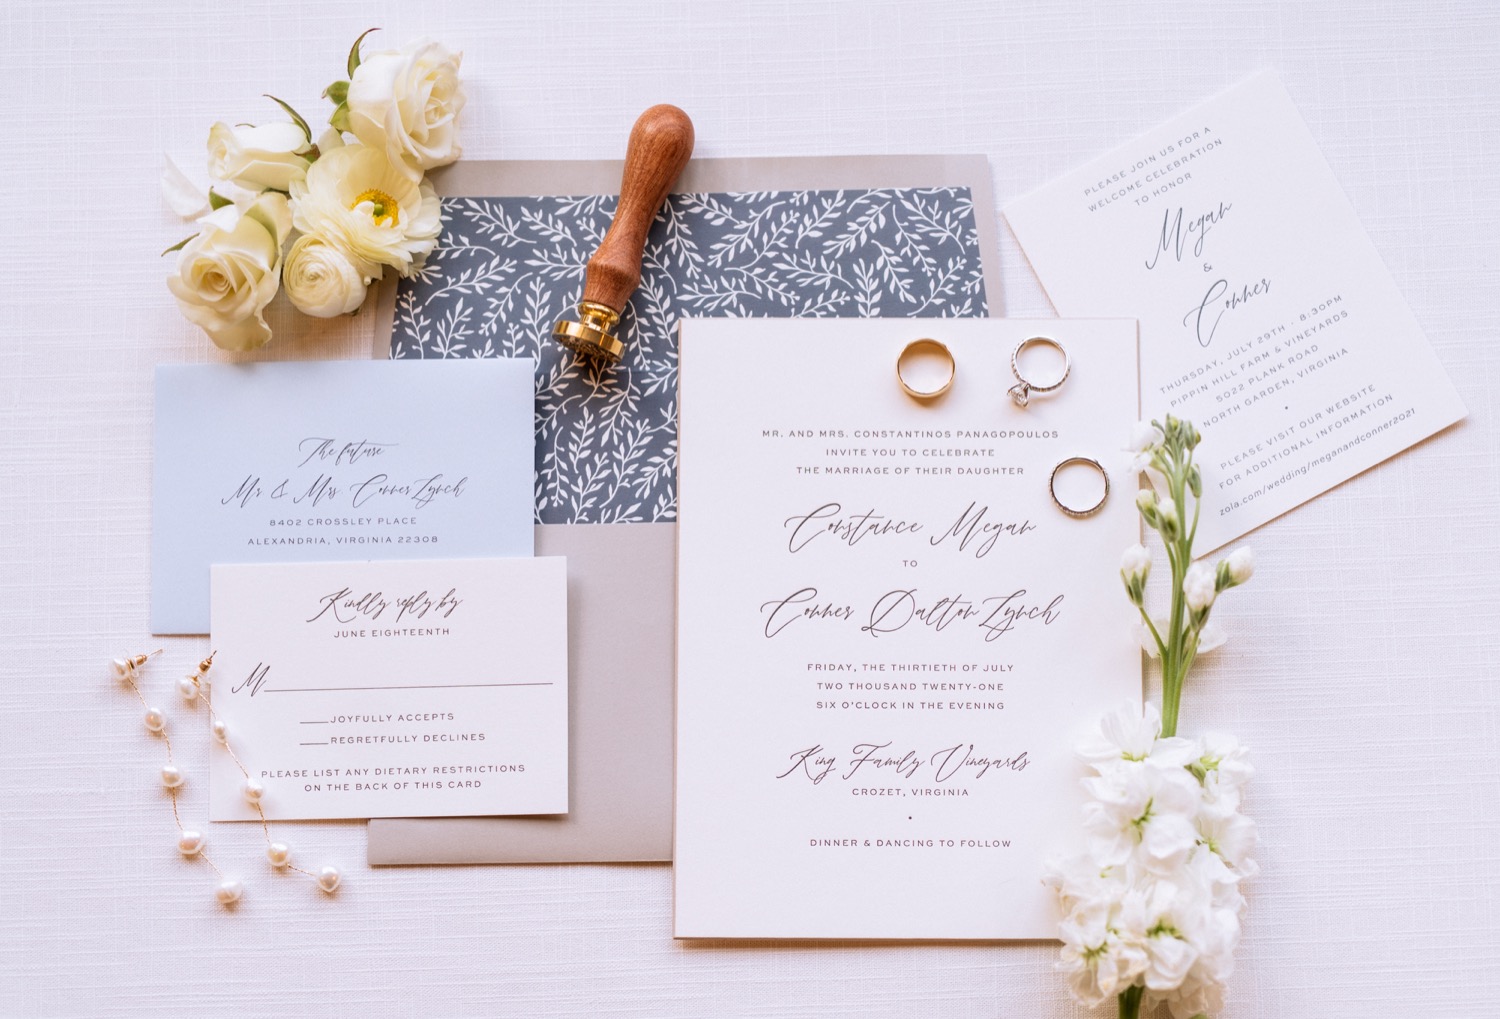 invitation, rings, save the date, and flowers